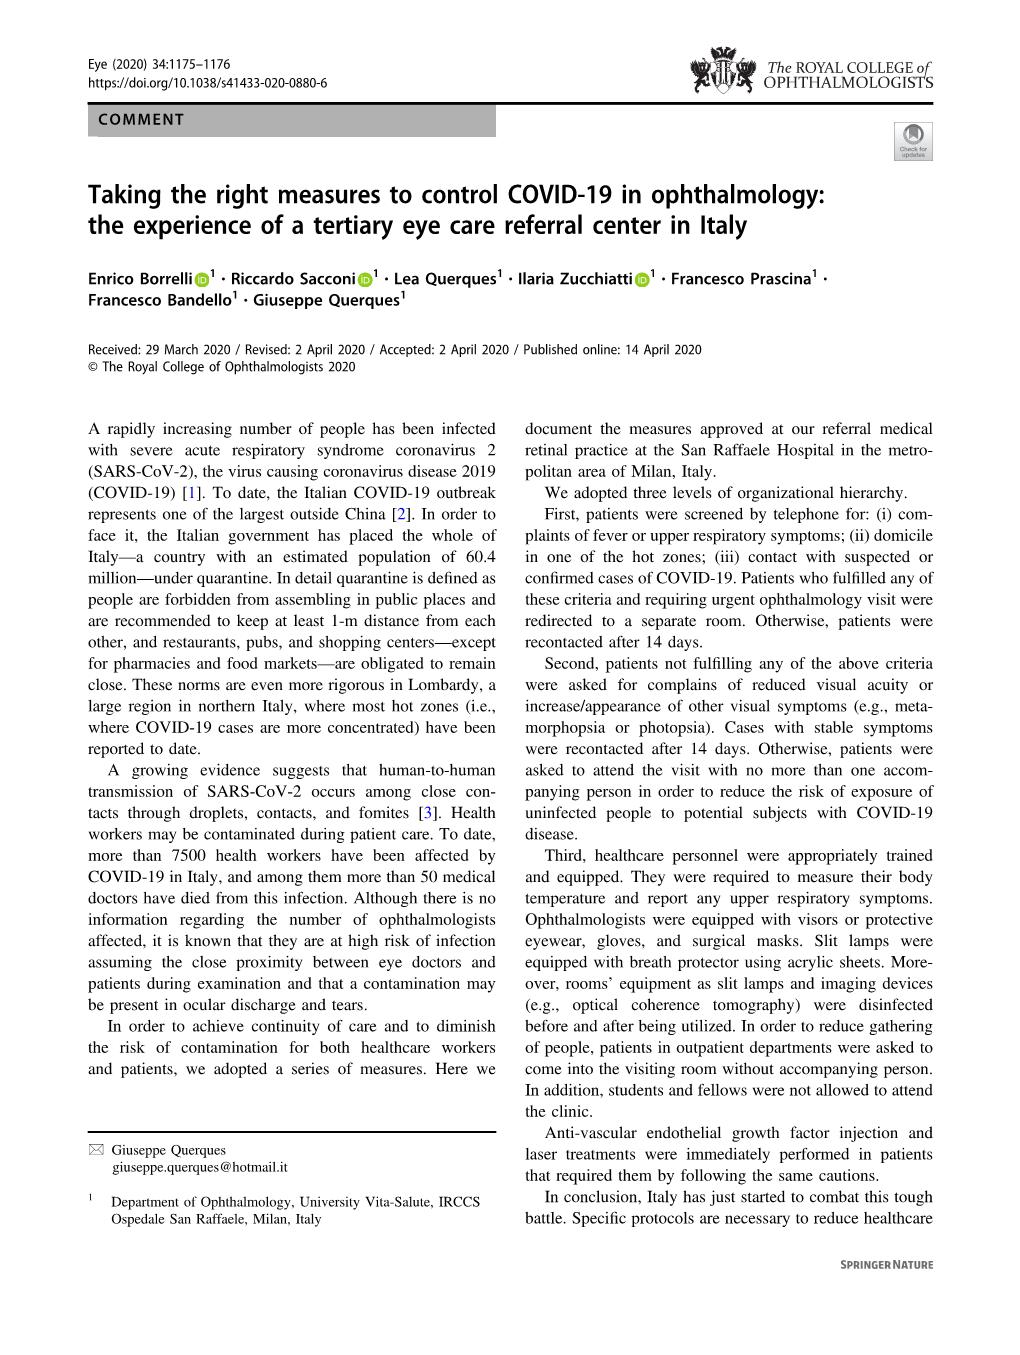 Taking the Right Measures to Control COVID-19 in Ophthalmology: the Experience of a Tertiary Eye Care Referral Center in Italy